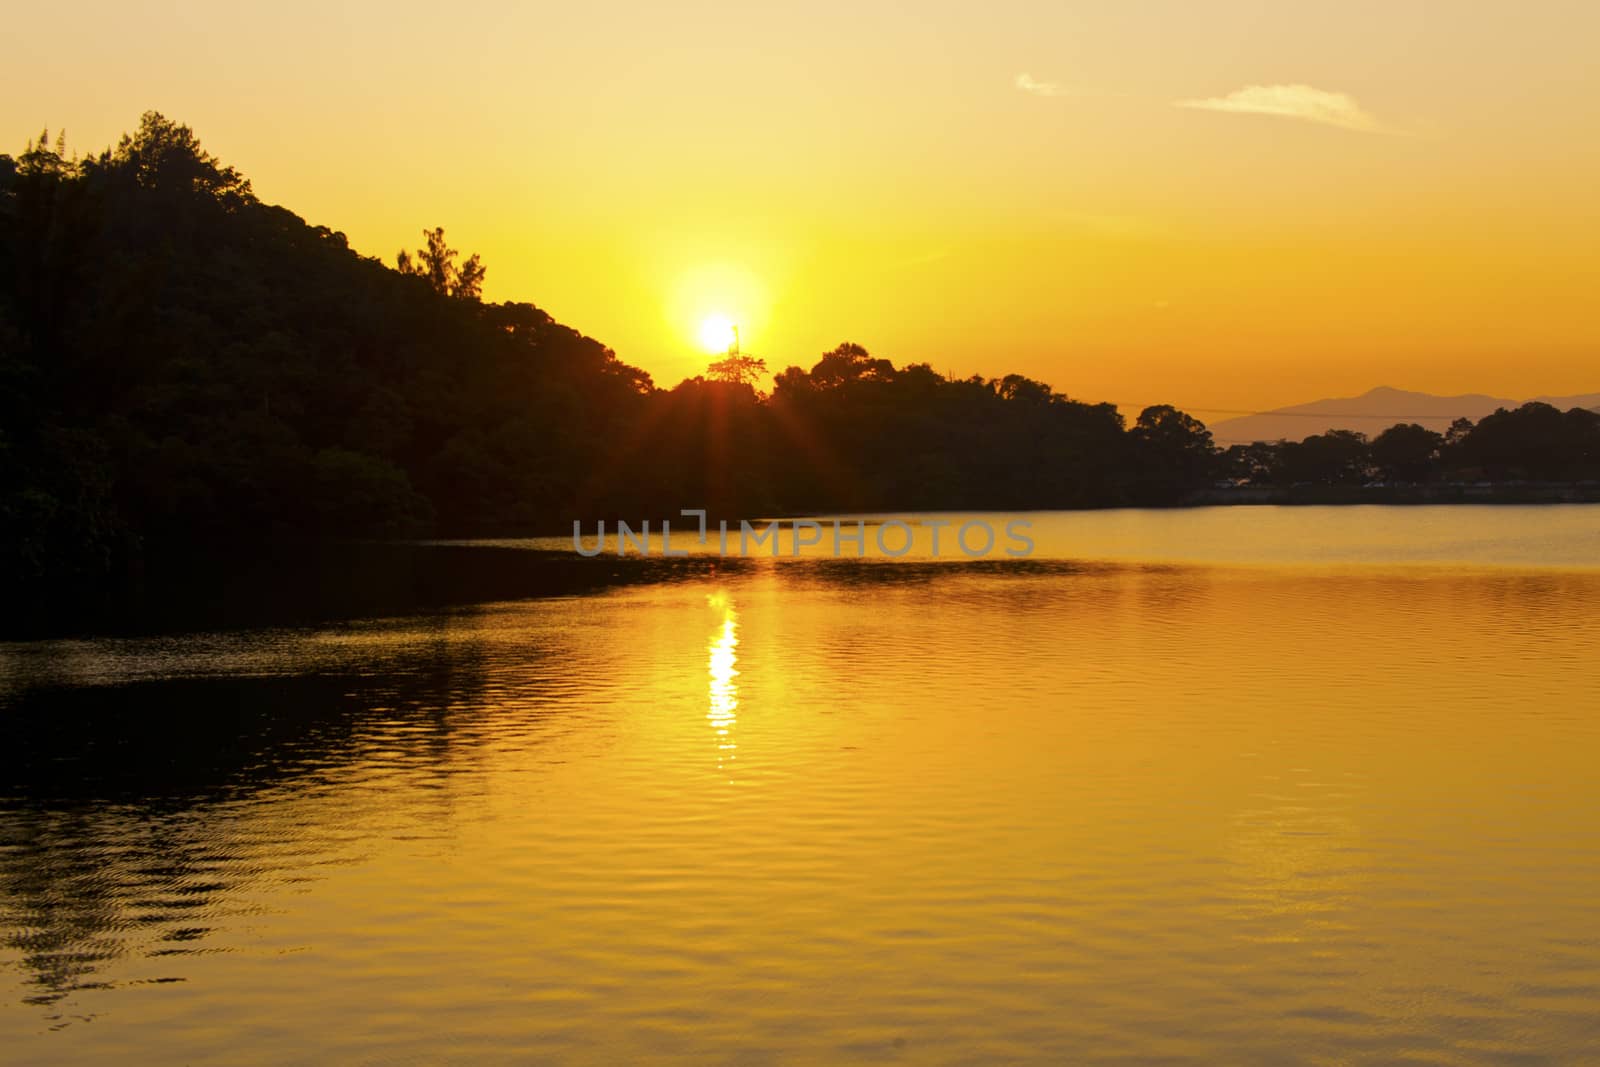 Sunset pond in Hong Kong by kawing921